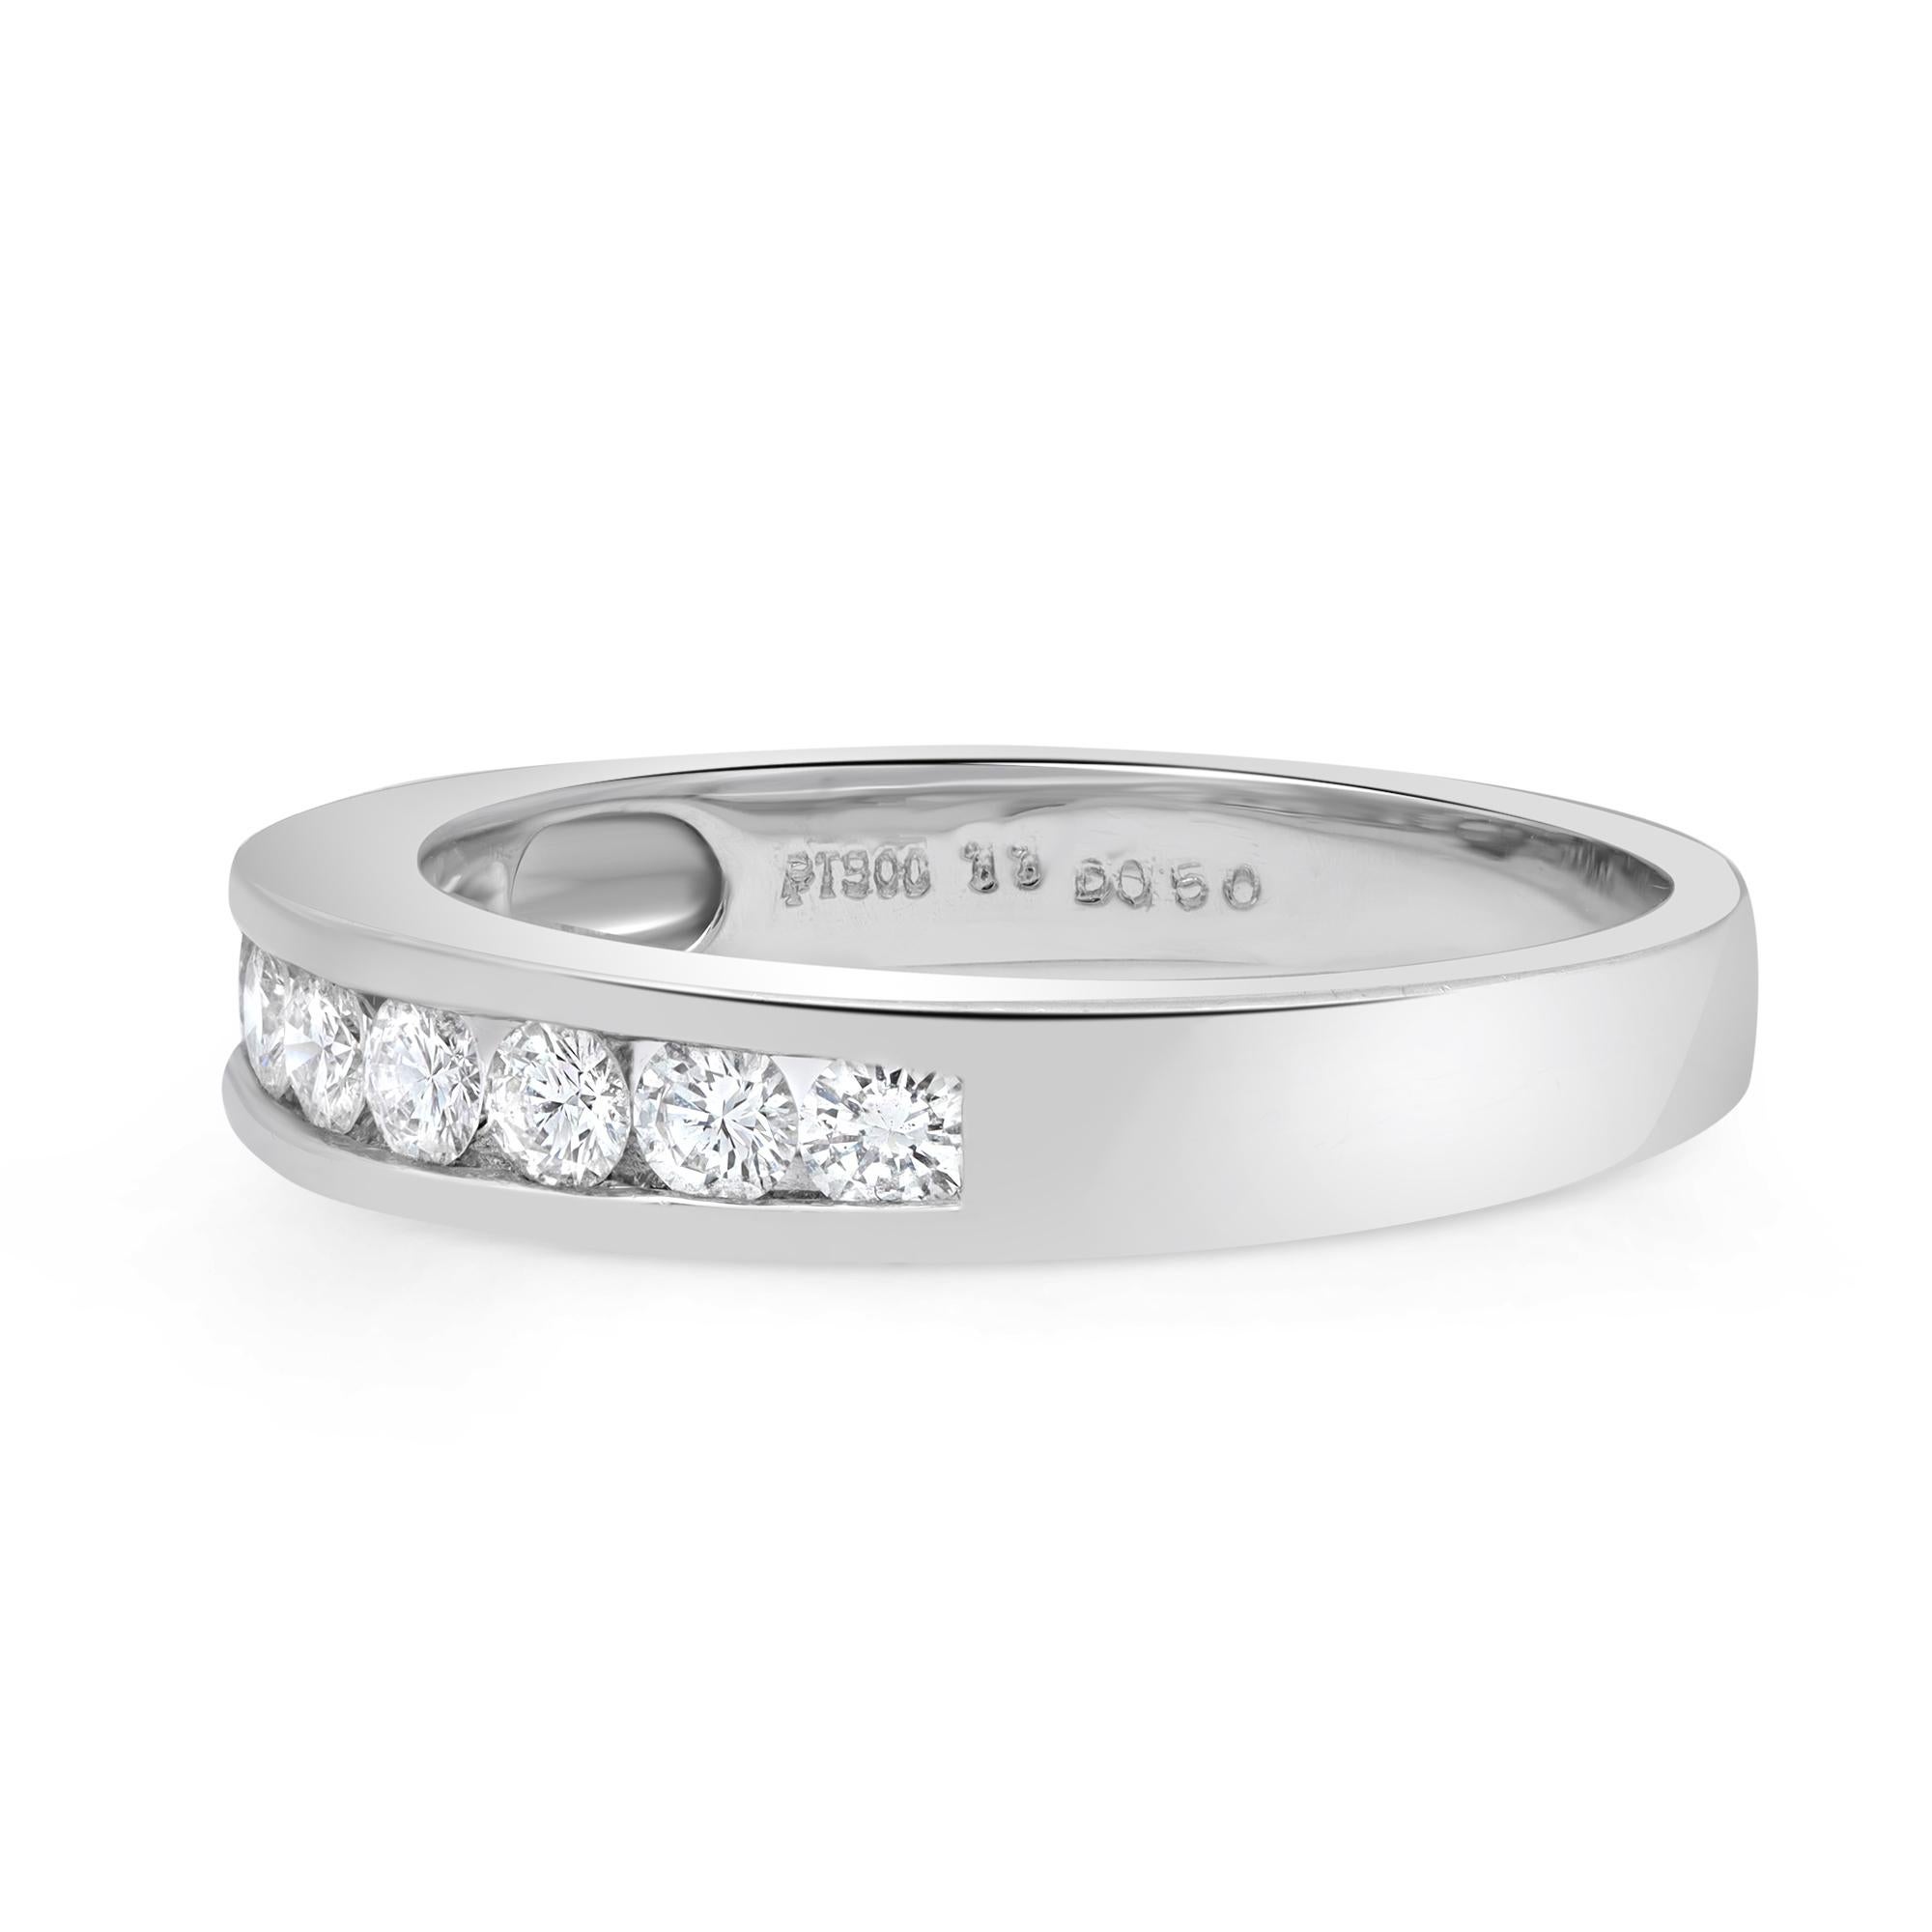 Timeless and stylish diamond wedding band ring. Crafted in fine high polished platinum. This ring features 9 dazzling round brilliant cut diamonds in channel setting. Perfect for a gift or as a promise ring. Total diamond weight: 0.50 carat. Diamond